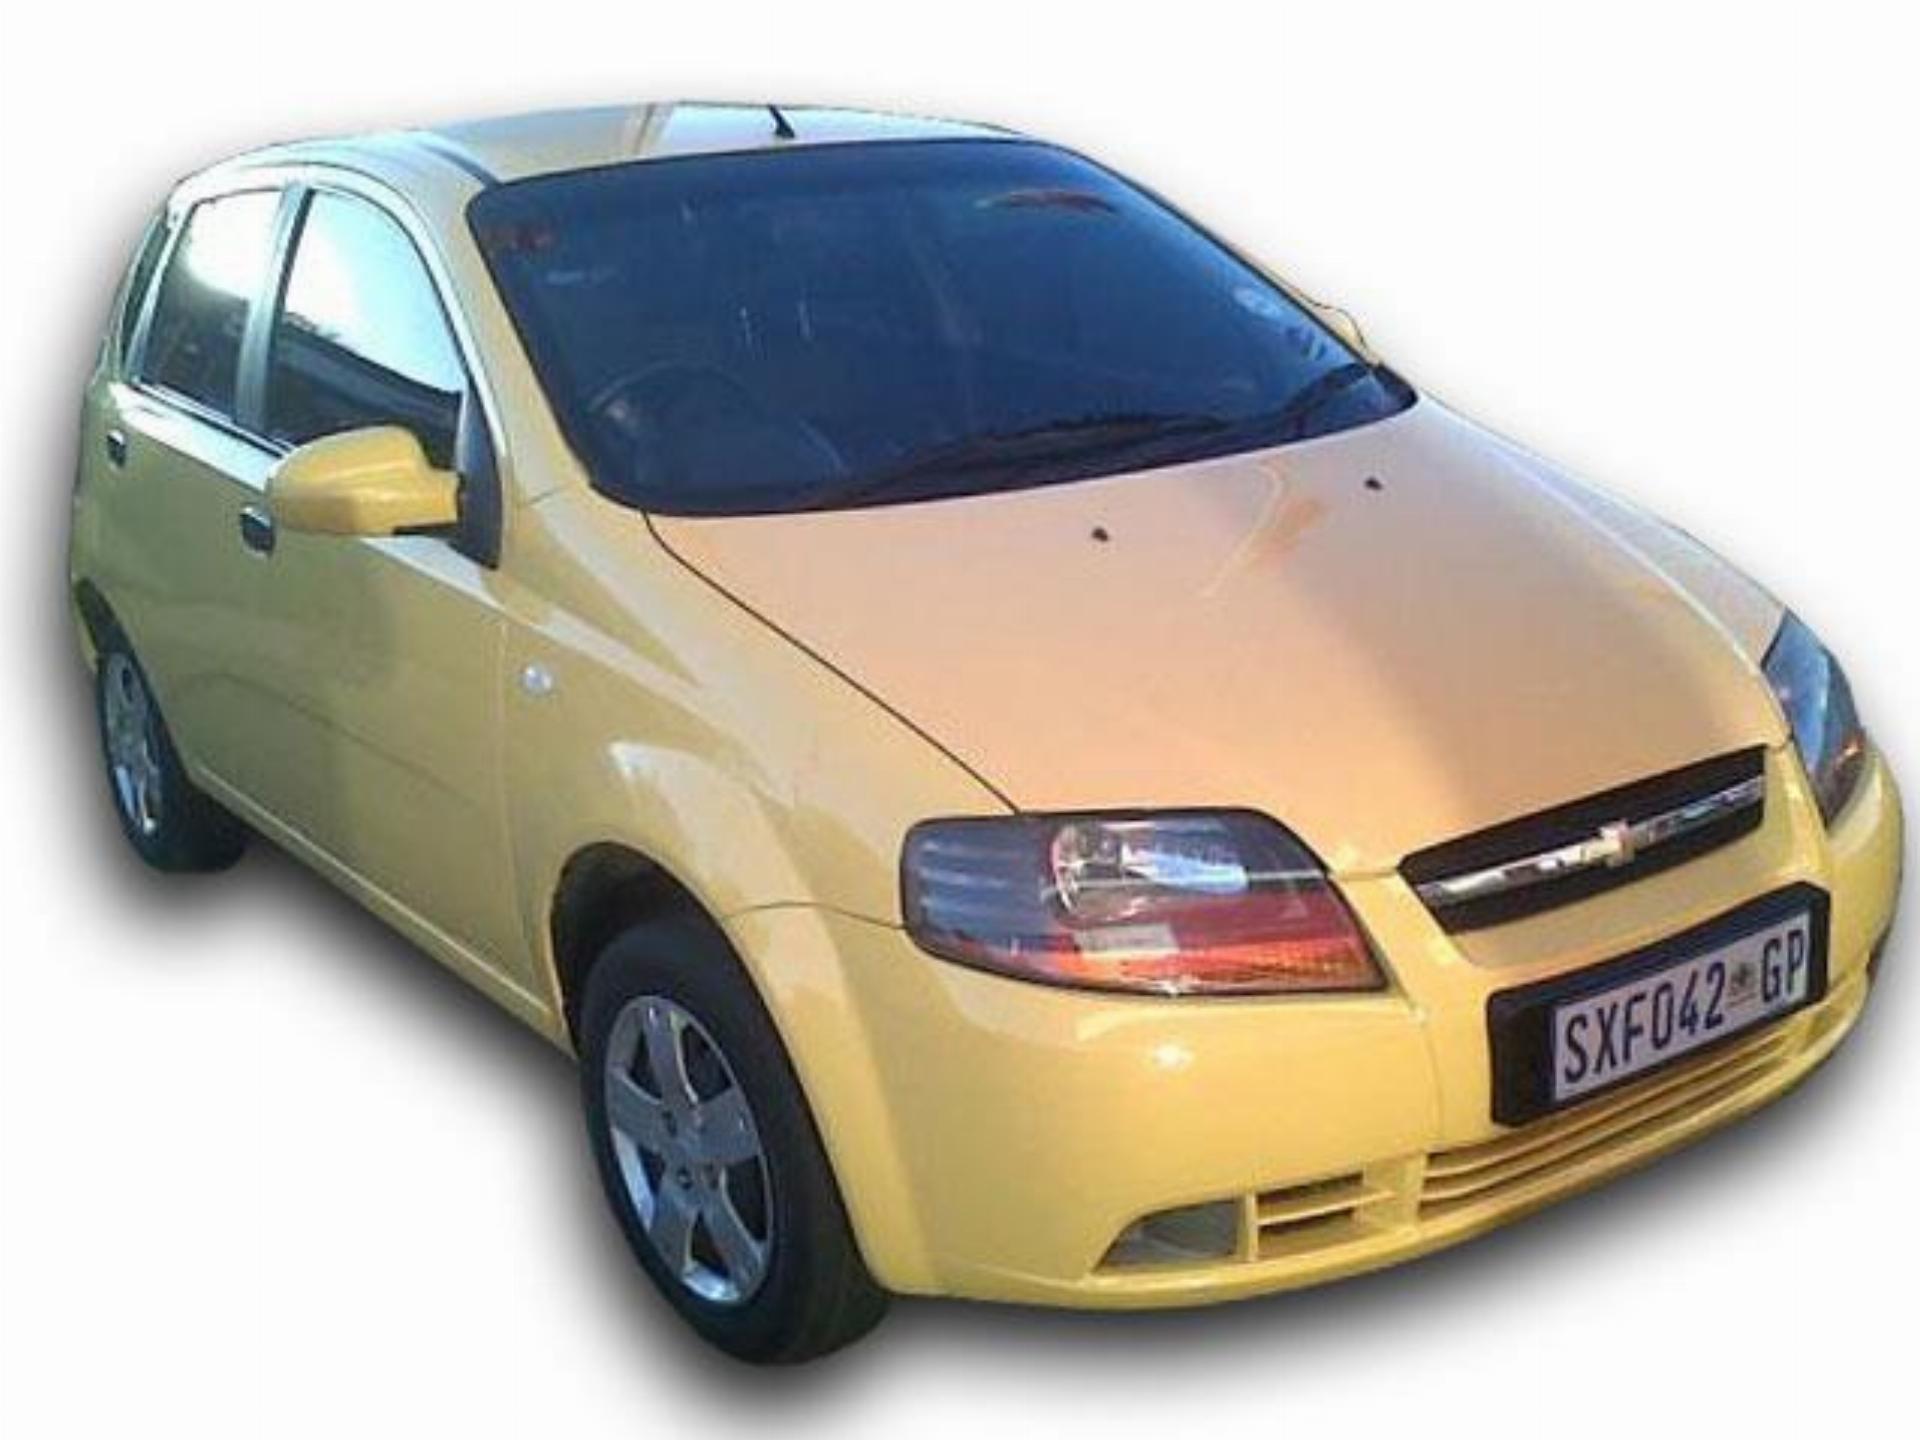 Used Chevrolet Aveo 1.5 5DR Hatch 2005 on auction PV1003276